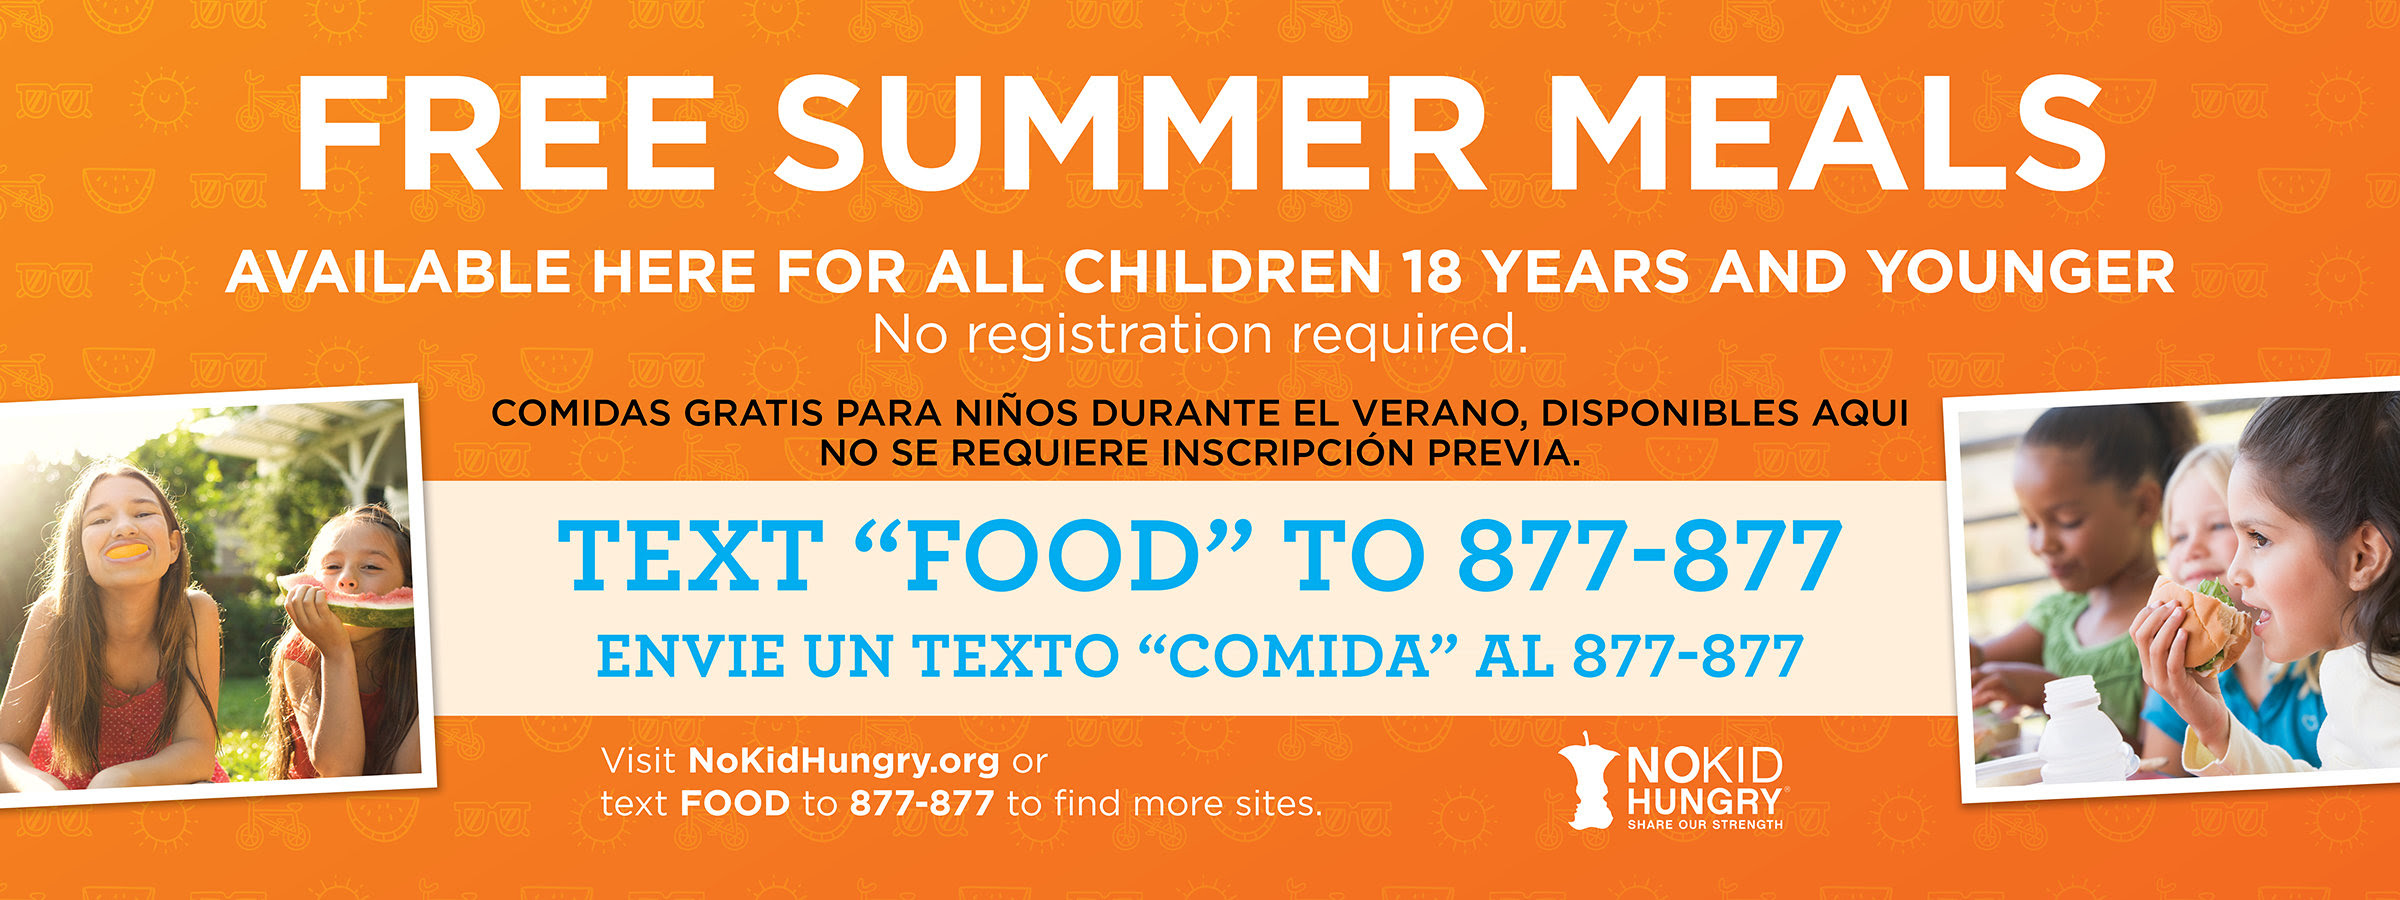 Free Summer Meals - Text "Food" to 877-877